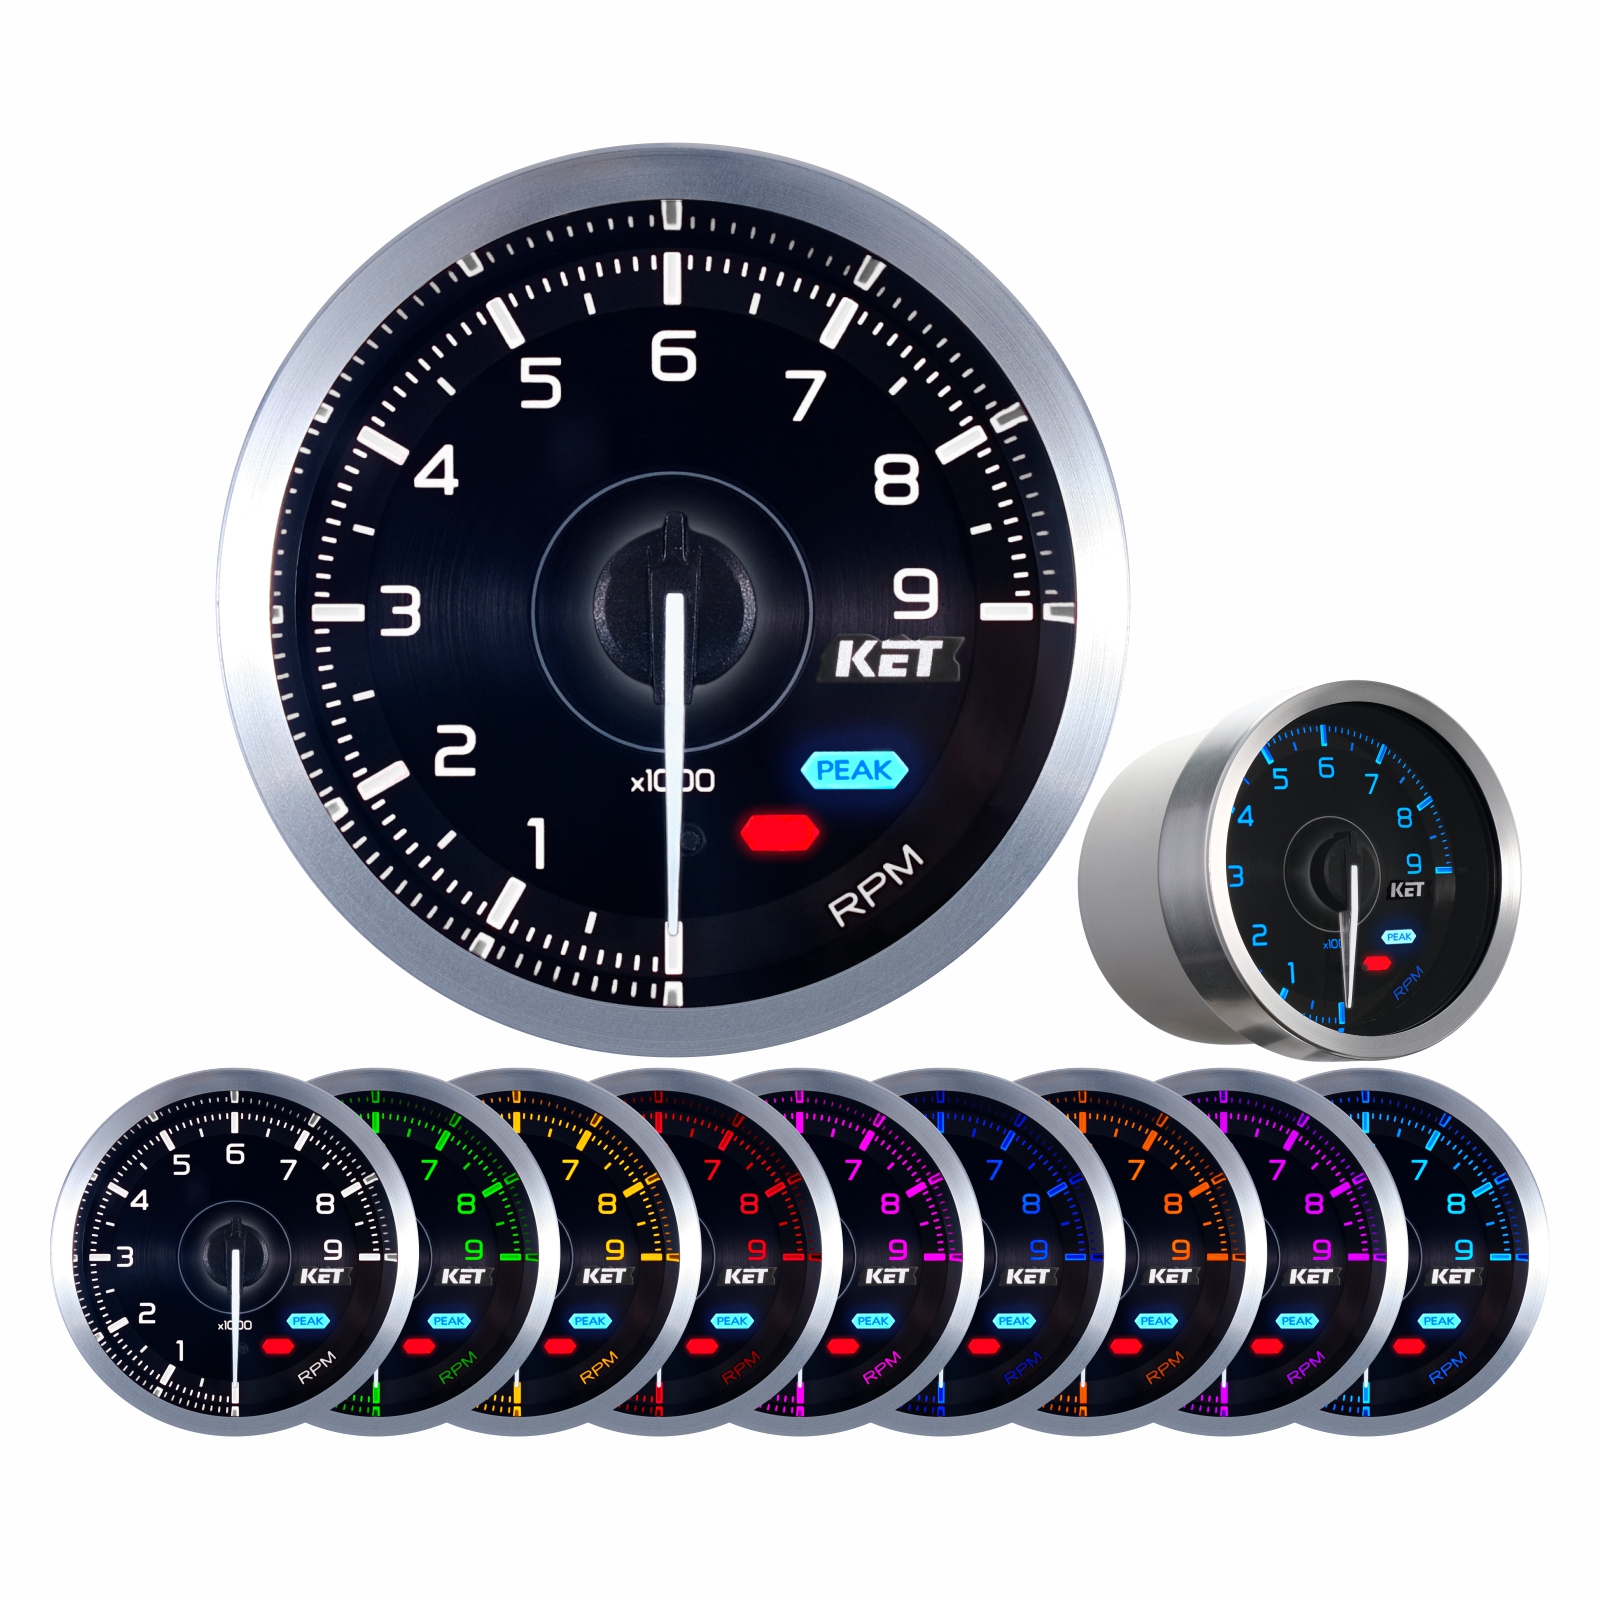 Muscle Tachometer.